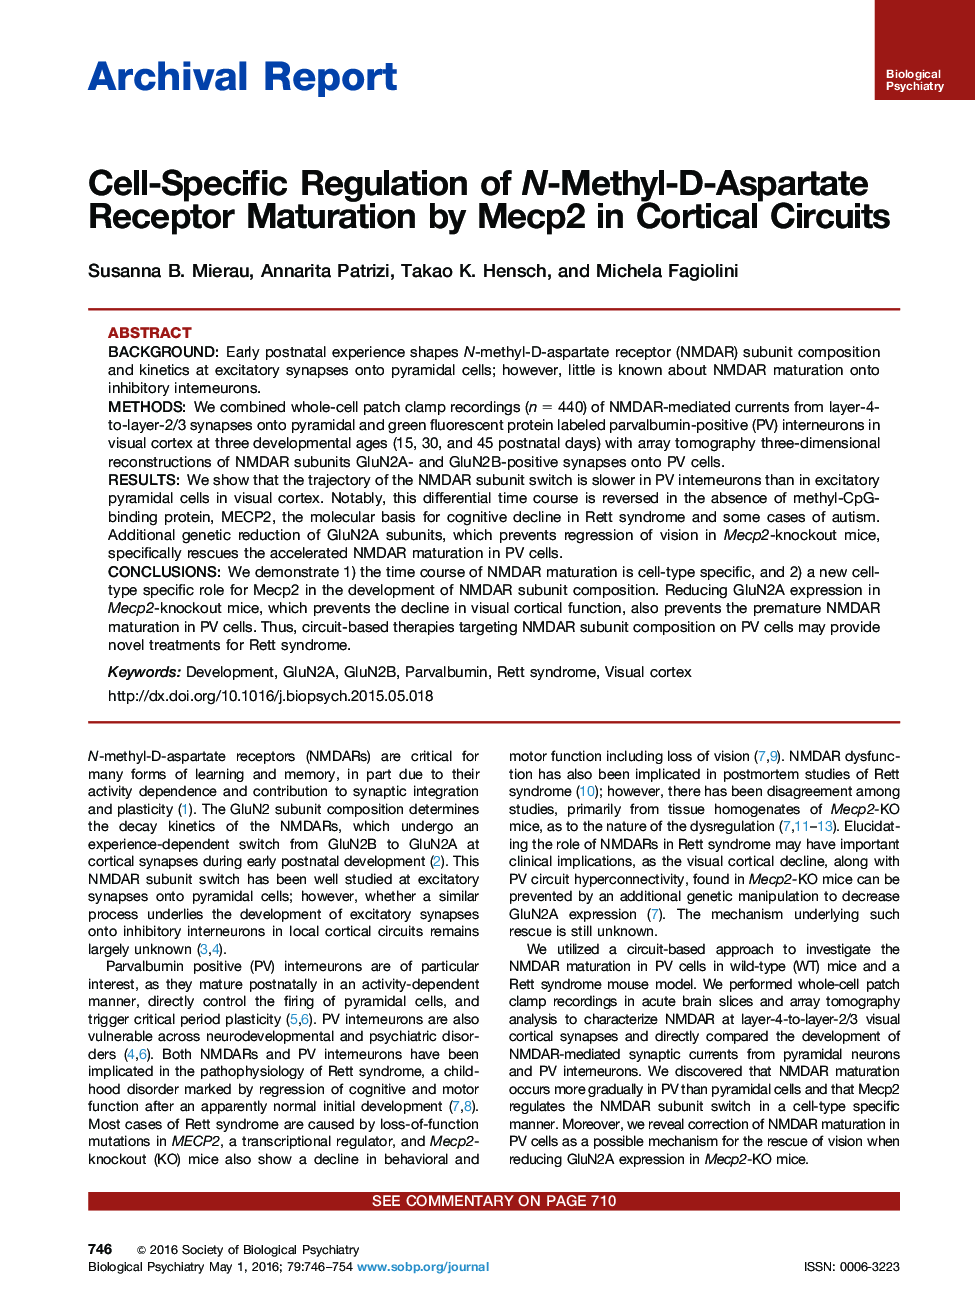 Cell-Specific Regulation of N-Methyl-D-Aspartate Receptor Maturation by Mecp2 in Cortical Circuits